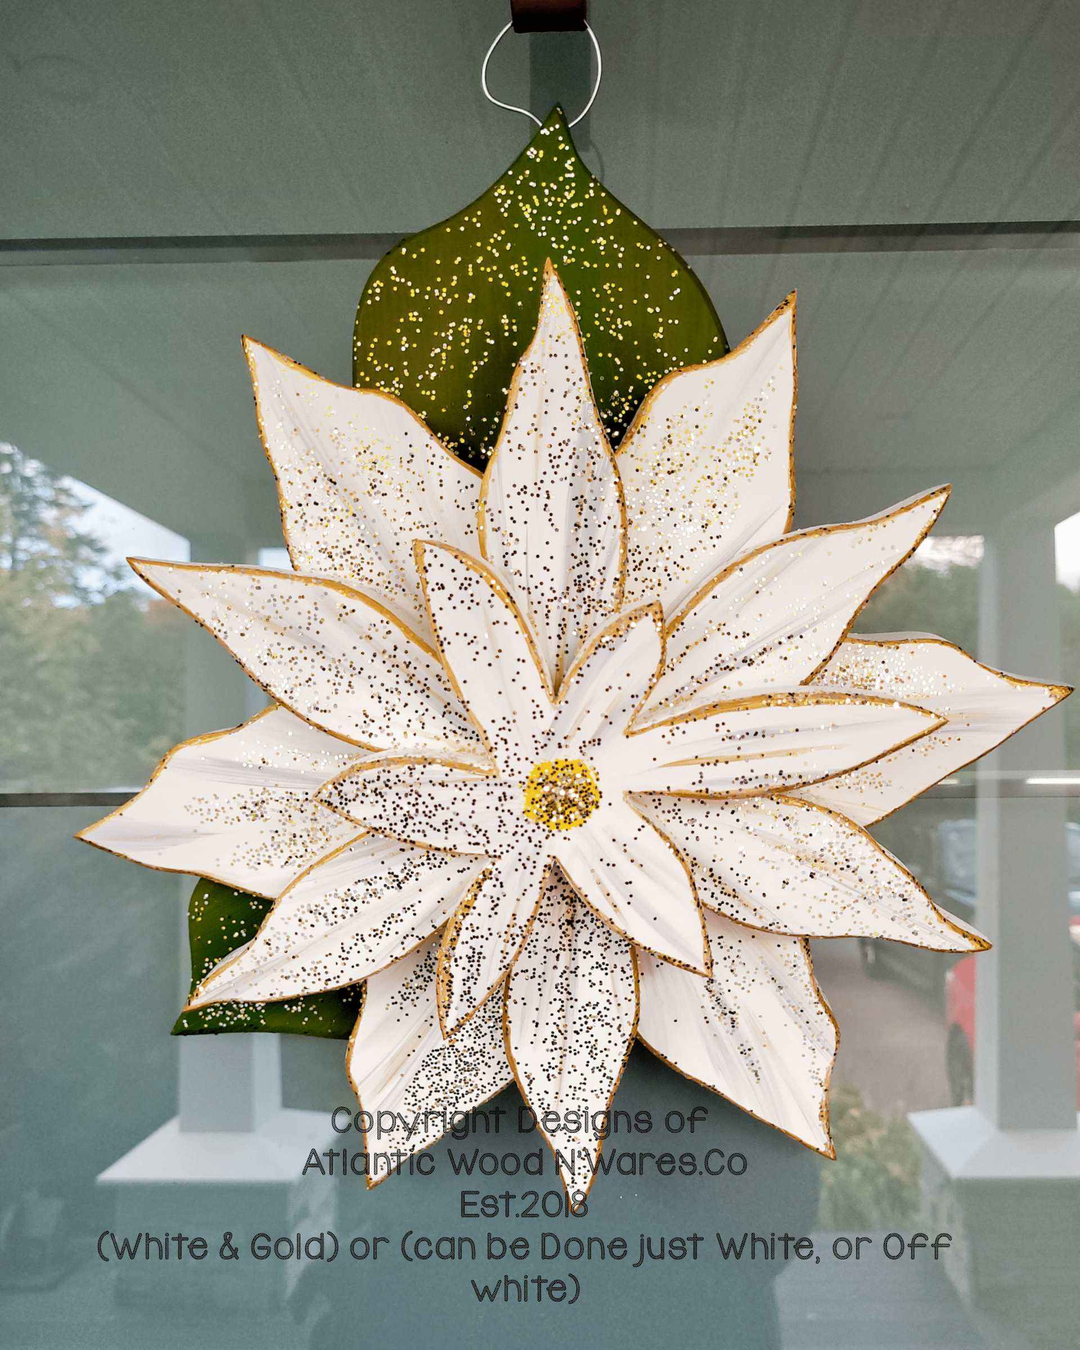 Atlantic Wood N Wares Home & Garden>Home Décor>Wall Decor>Wall Hangings The Poinsettia:A Beautiful and Unique Way to Celebrate the Holiday Season